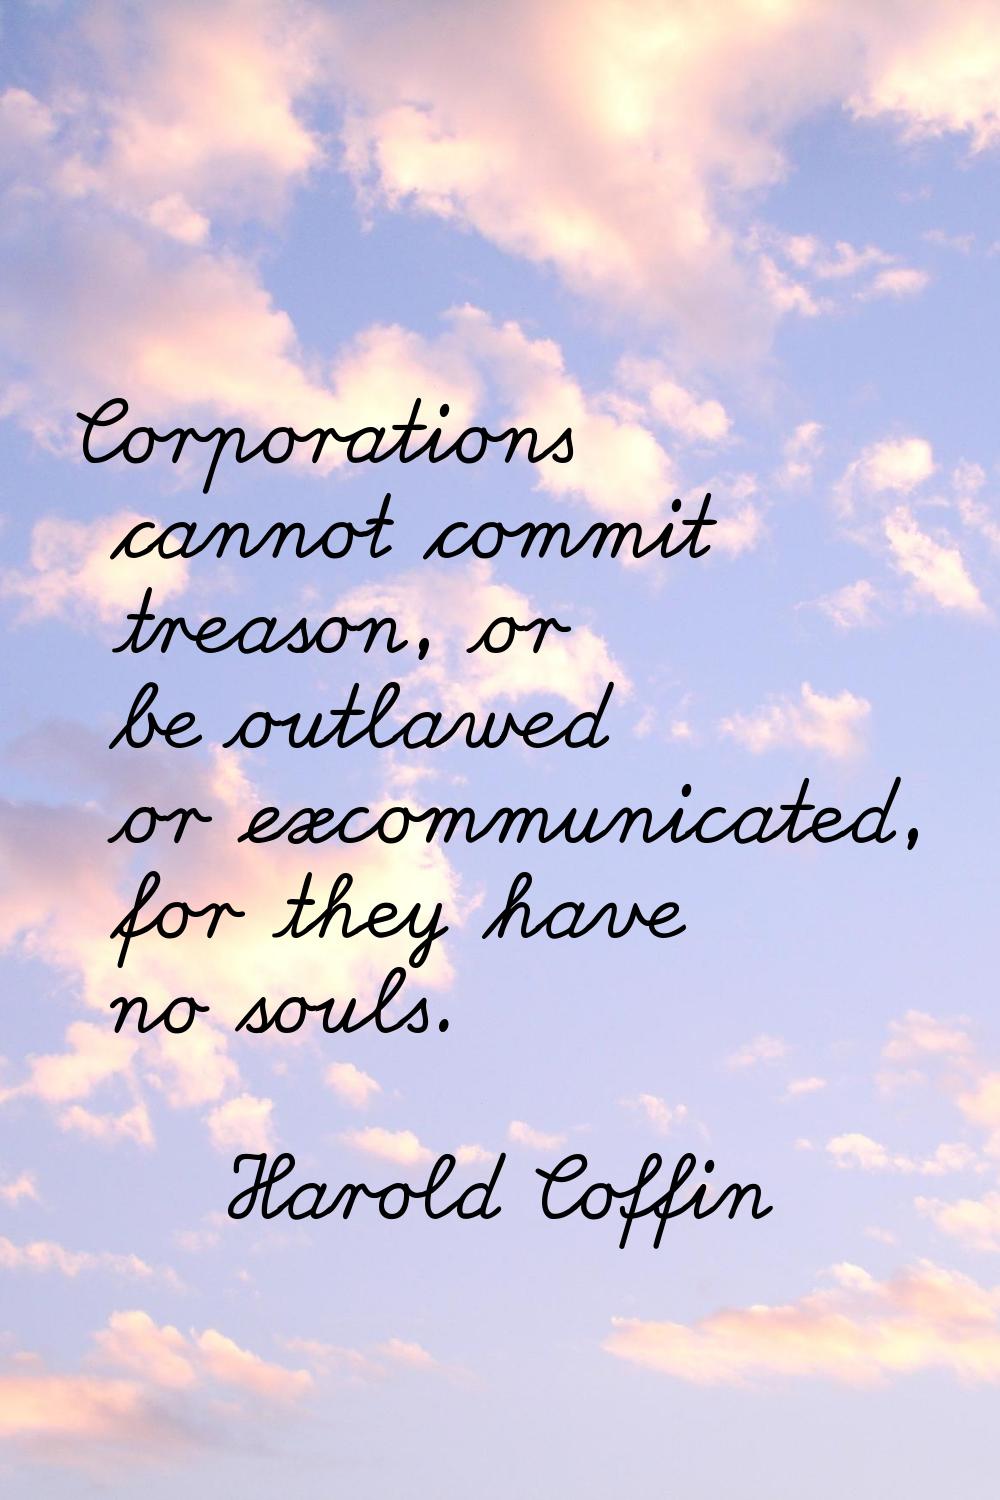 Corporations cannot commit treason, or be outlawed or excommunicated, for they have no souls.